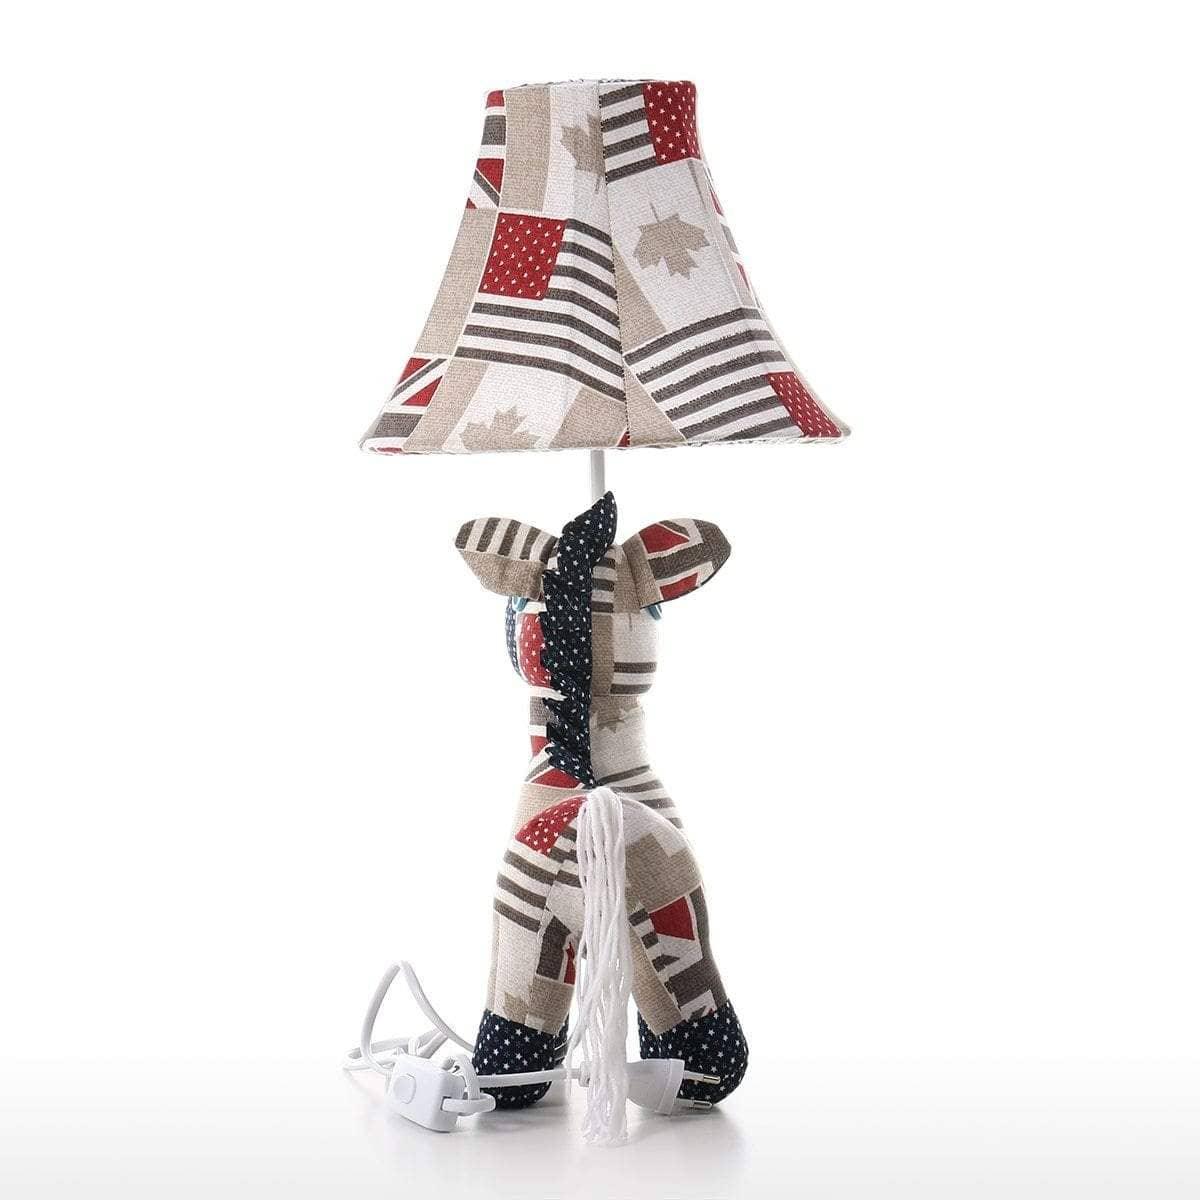 Horse Gallop Table Lamp: Playful and Stylish Lighting Accessory for Kids' Rooms